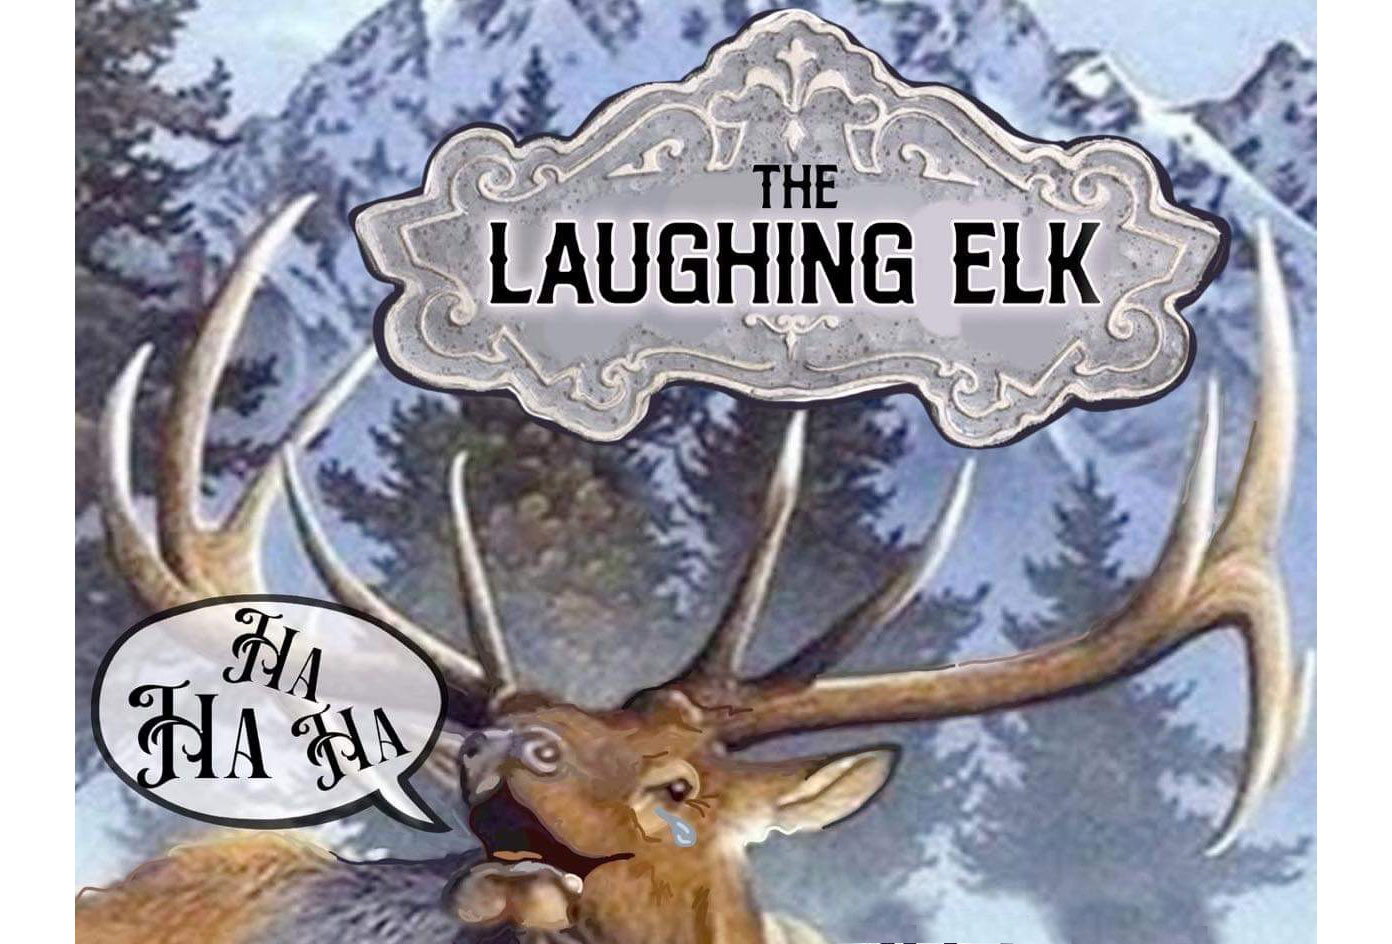 Laughing Elk Comedy Night with Mary Lou Gamba